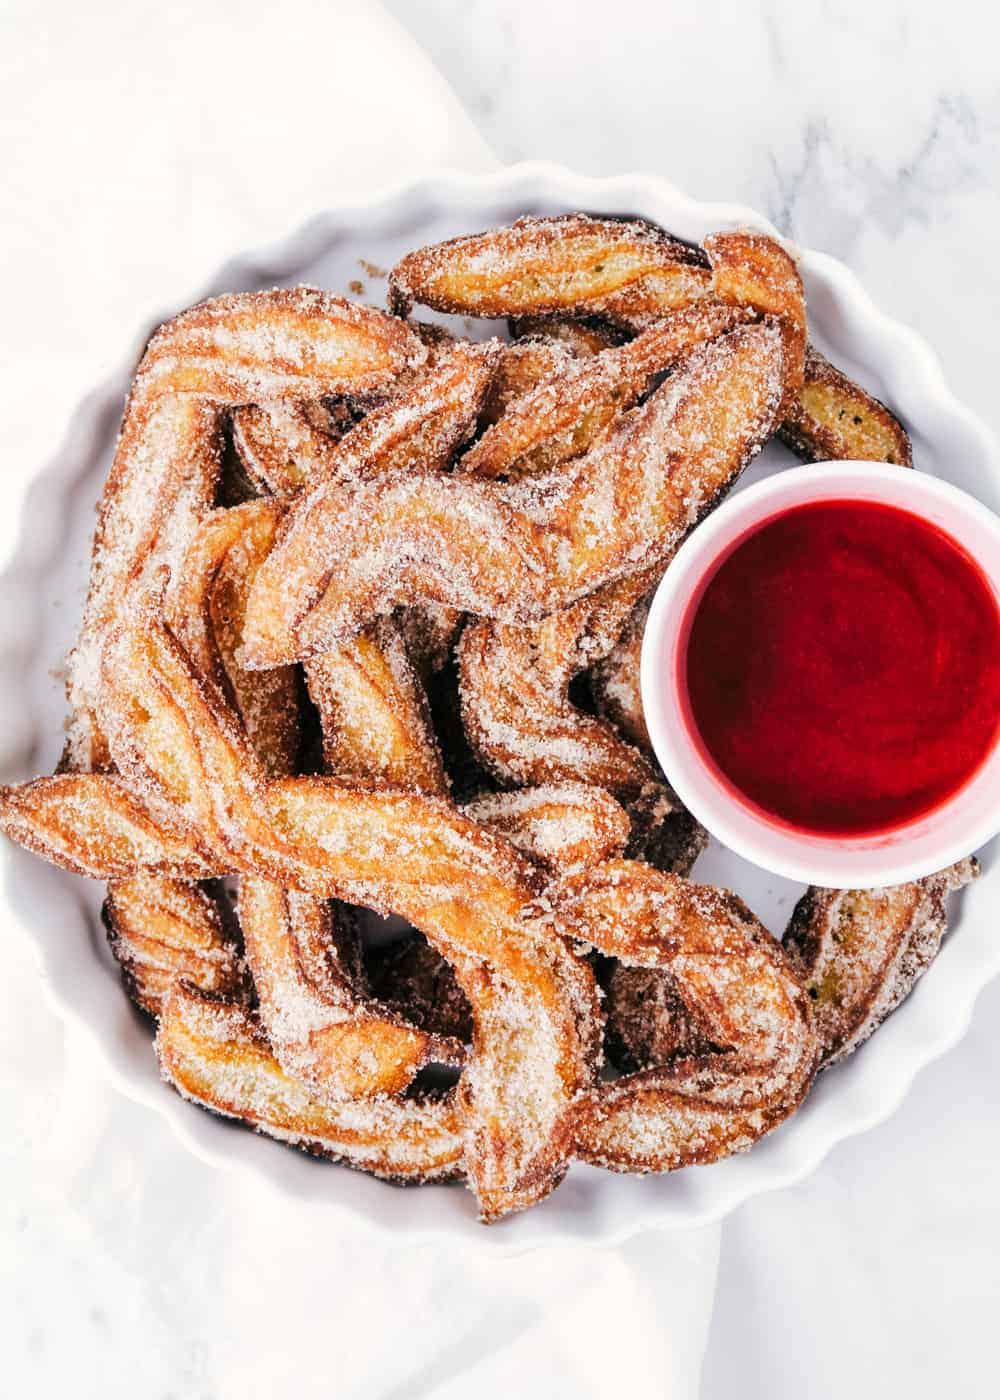 Homemade churros with raspberry sauce on white plate.